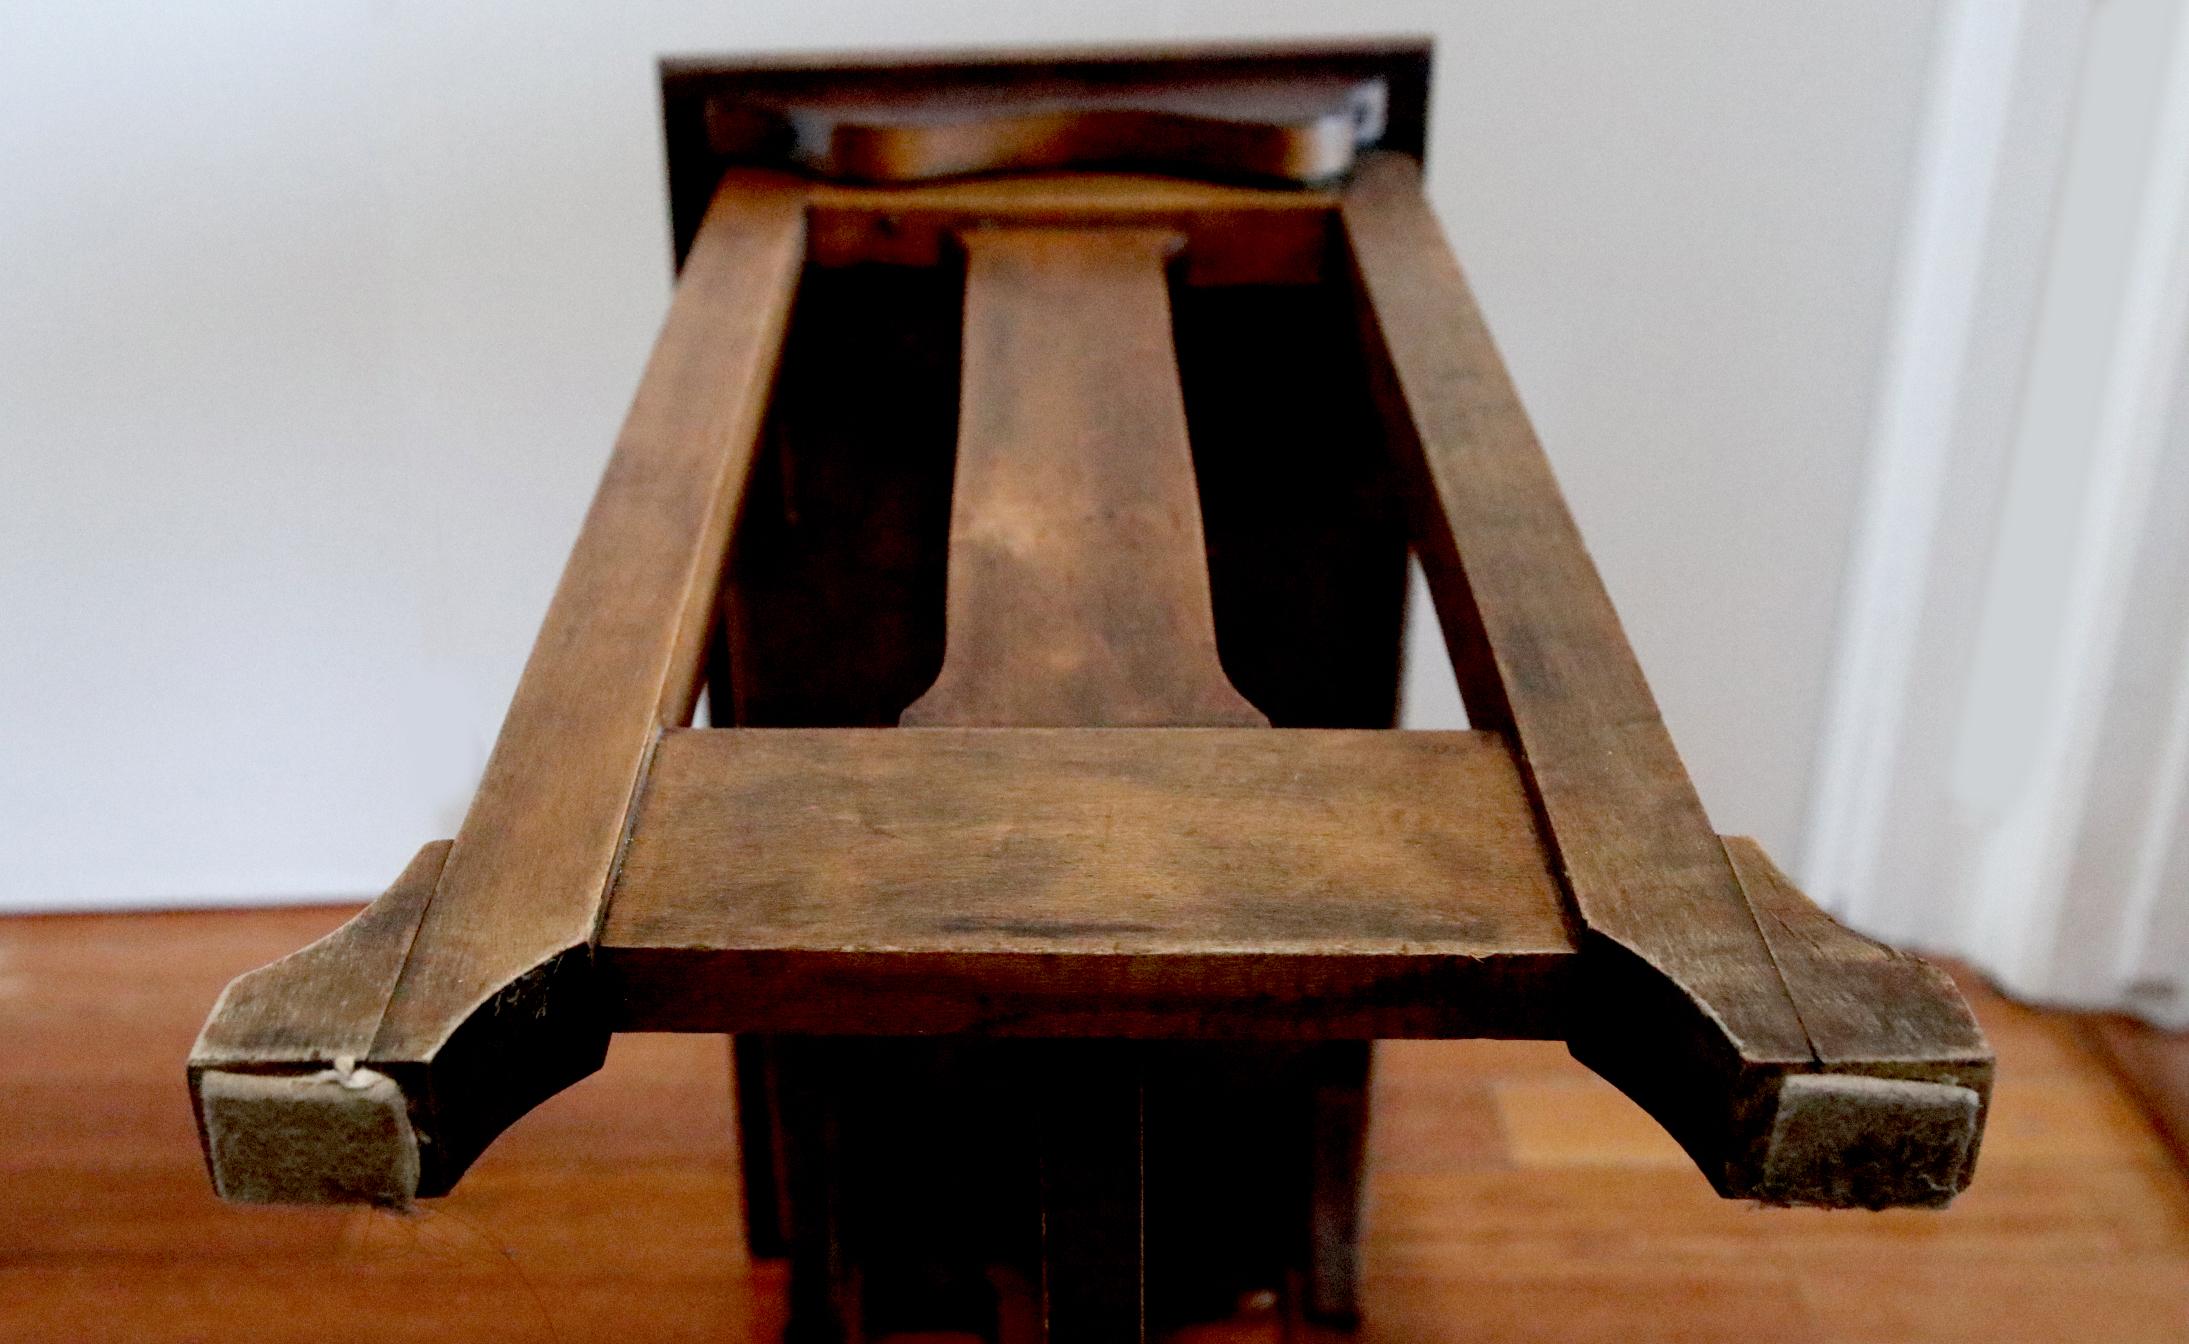 Rare 19th Century Folding Pew, Altar, Desk from Regency Period, England or U.S. For Sale 1